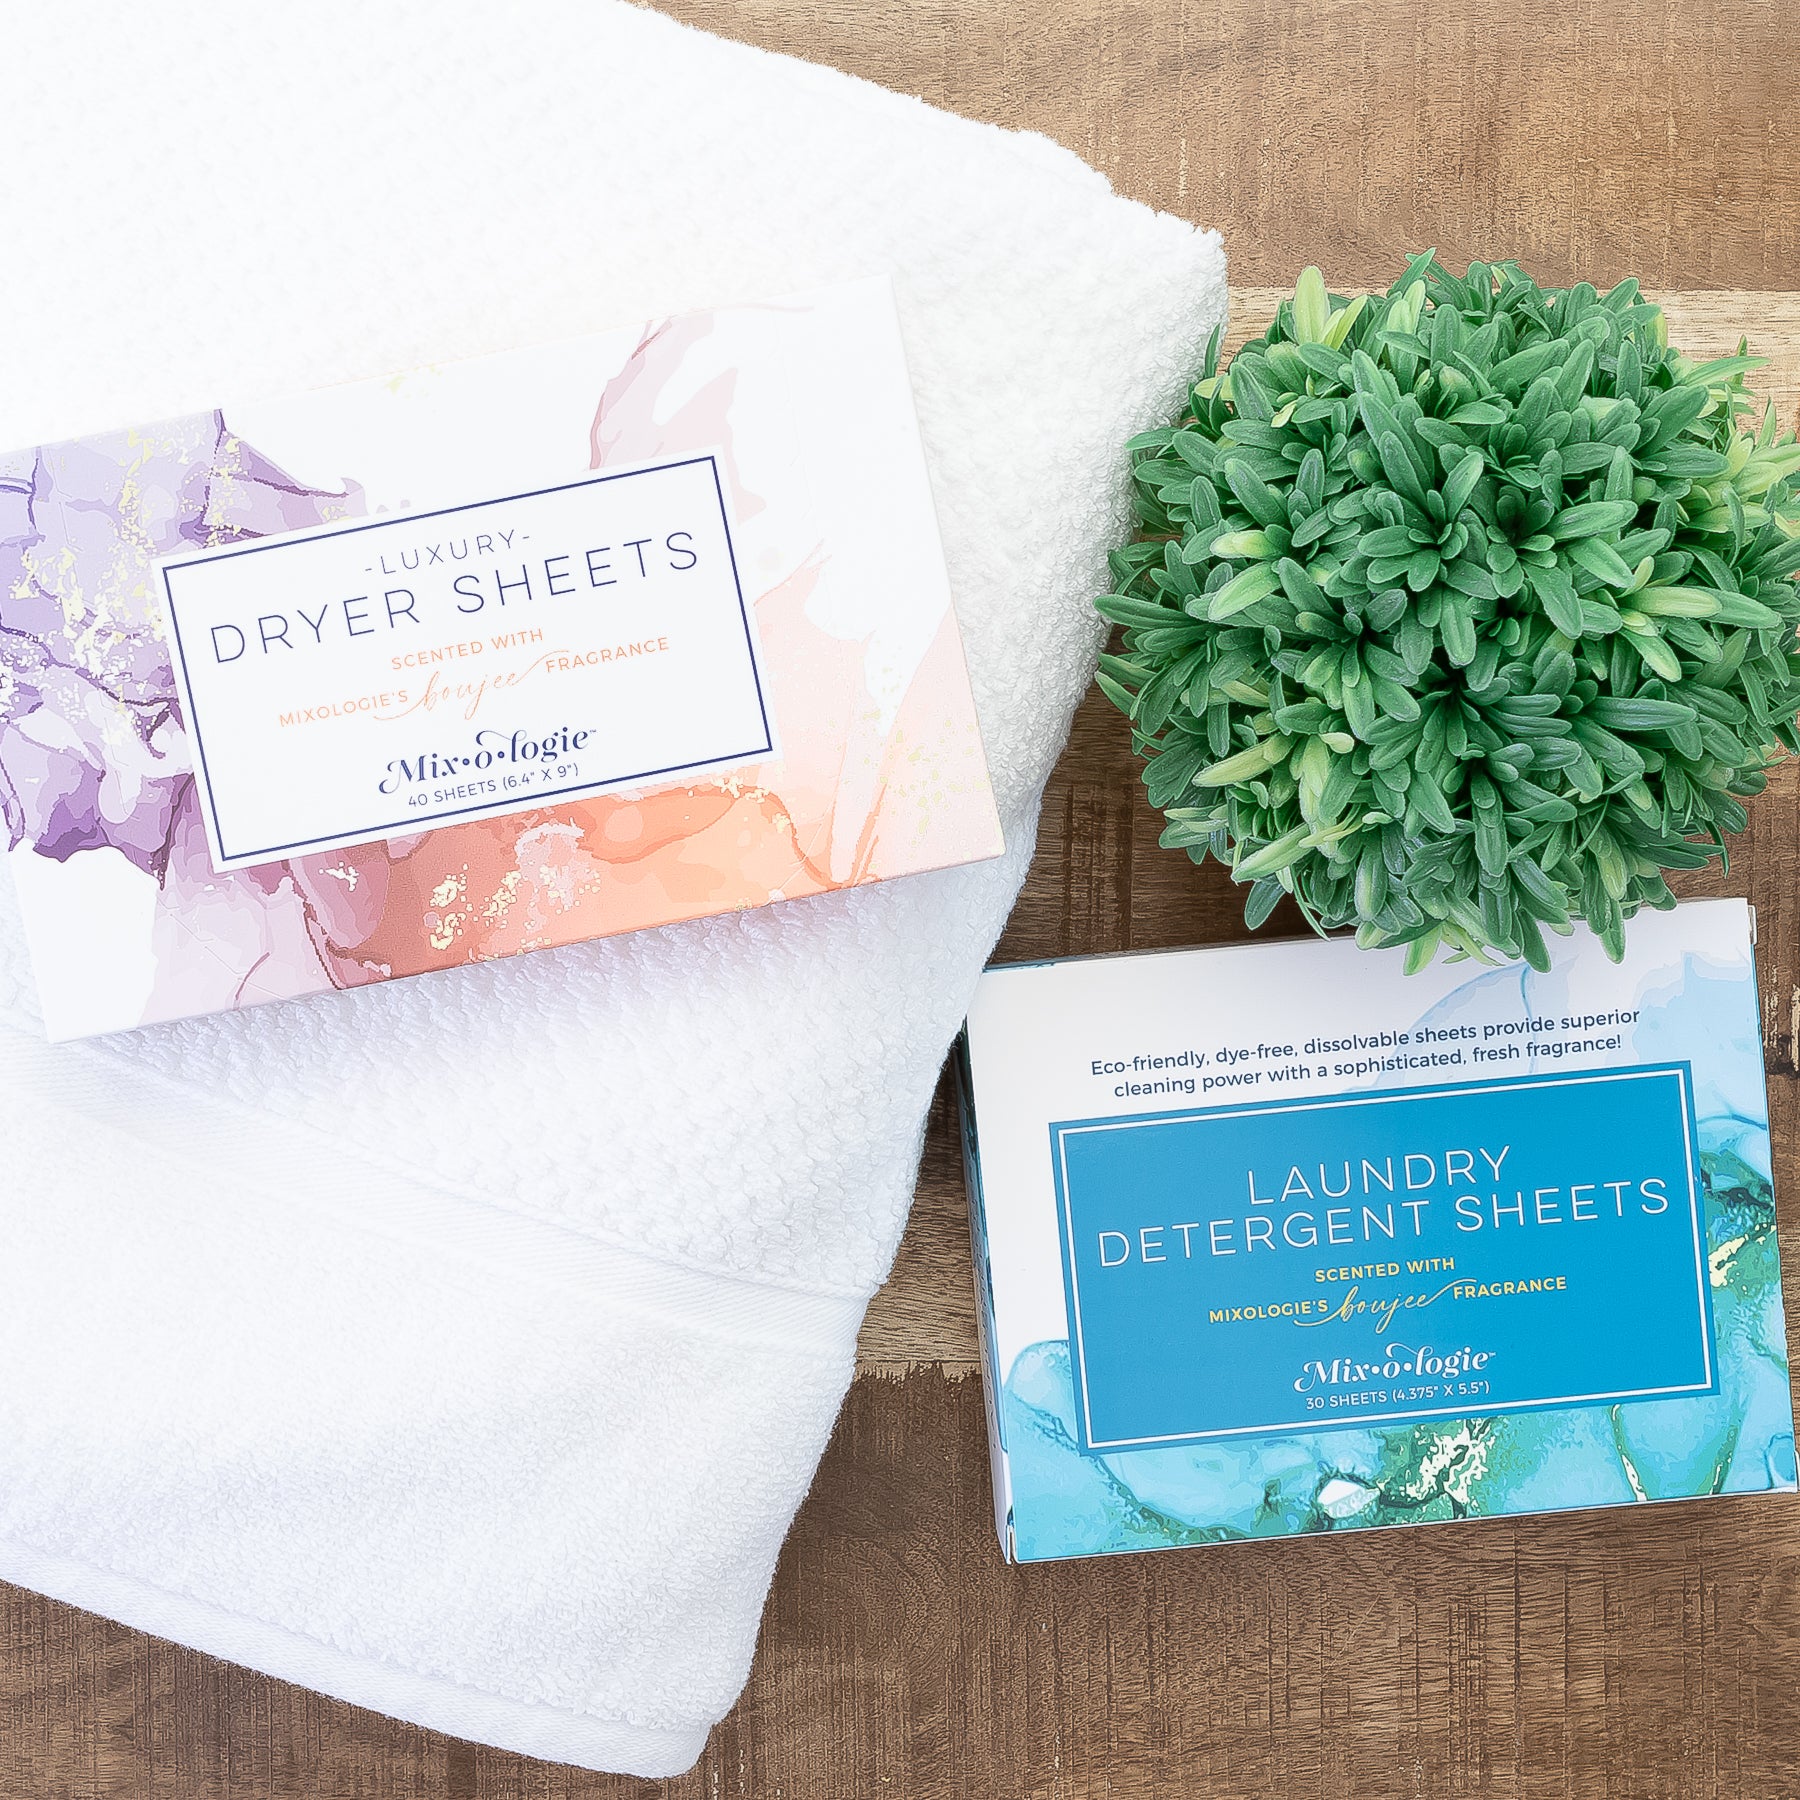 Boujee Laundry Detergent Sheets and Dryer Sheets in packaging on white towel with greenery